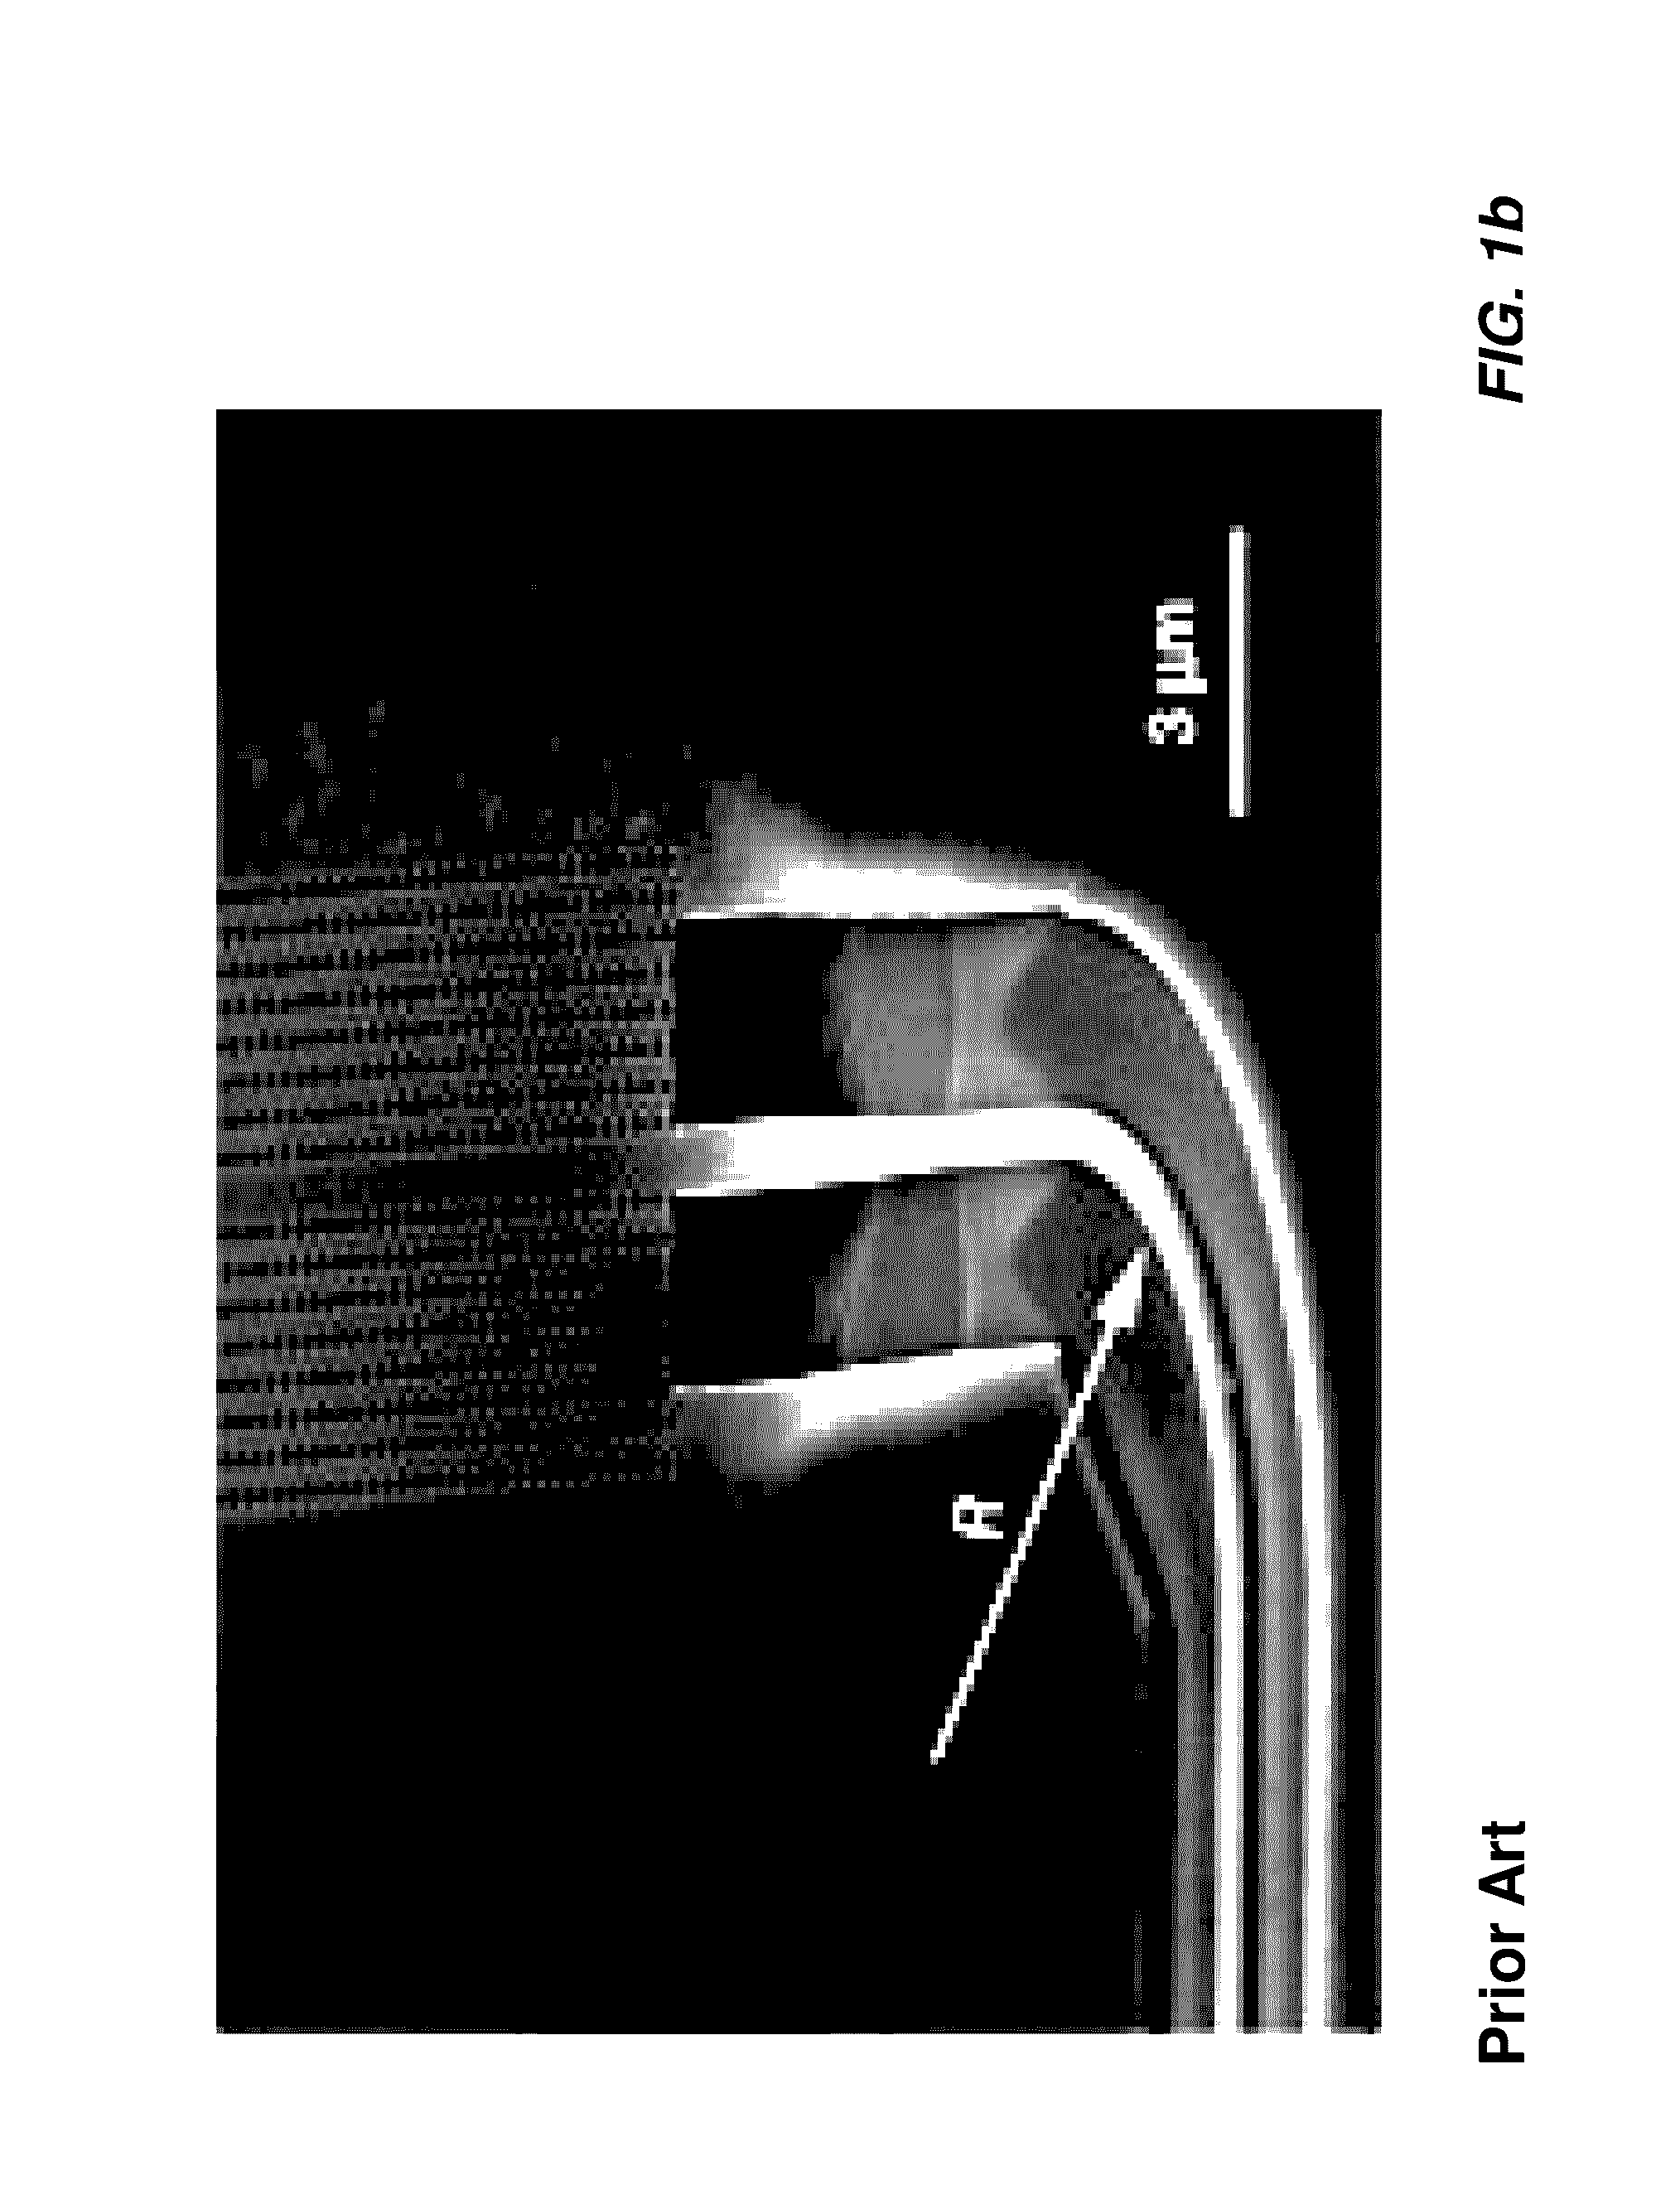 Article and method for implementing electronic devices on a substrate using quantum dot layers